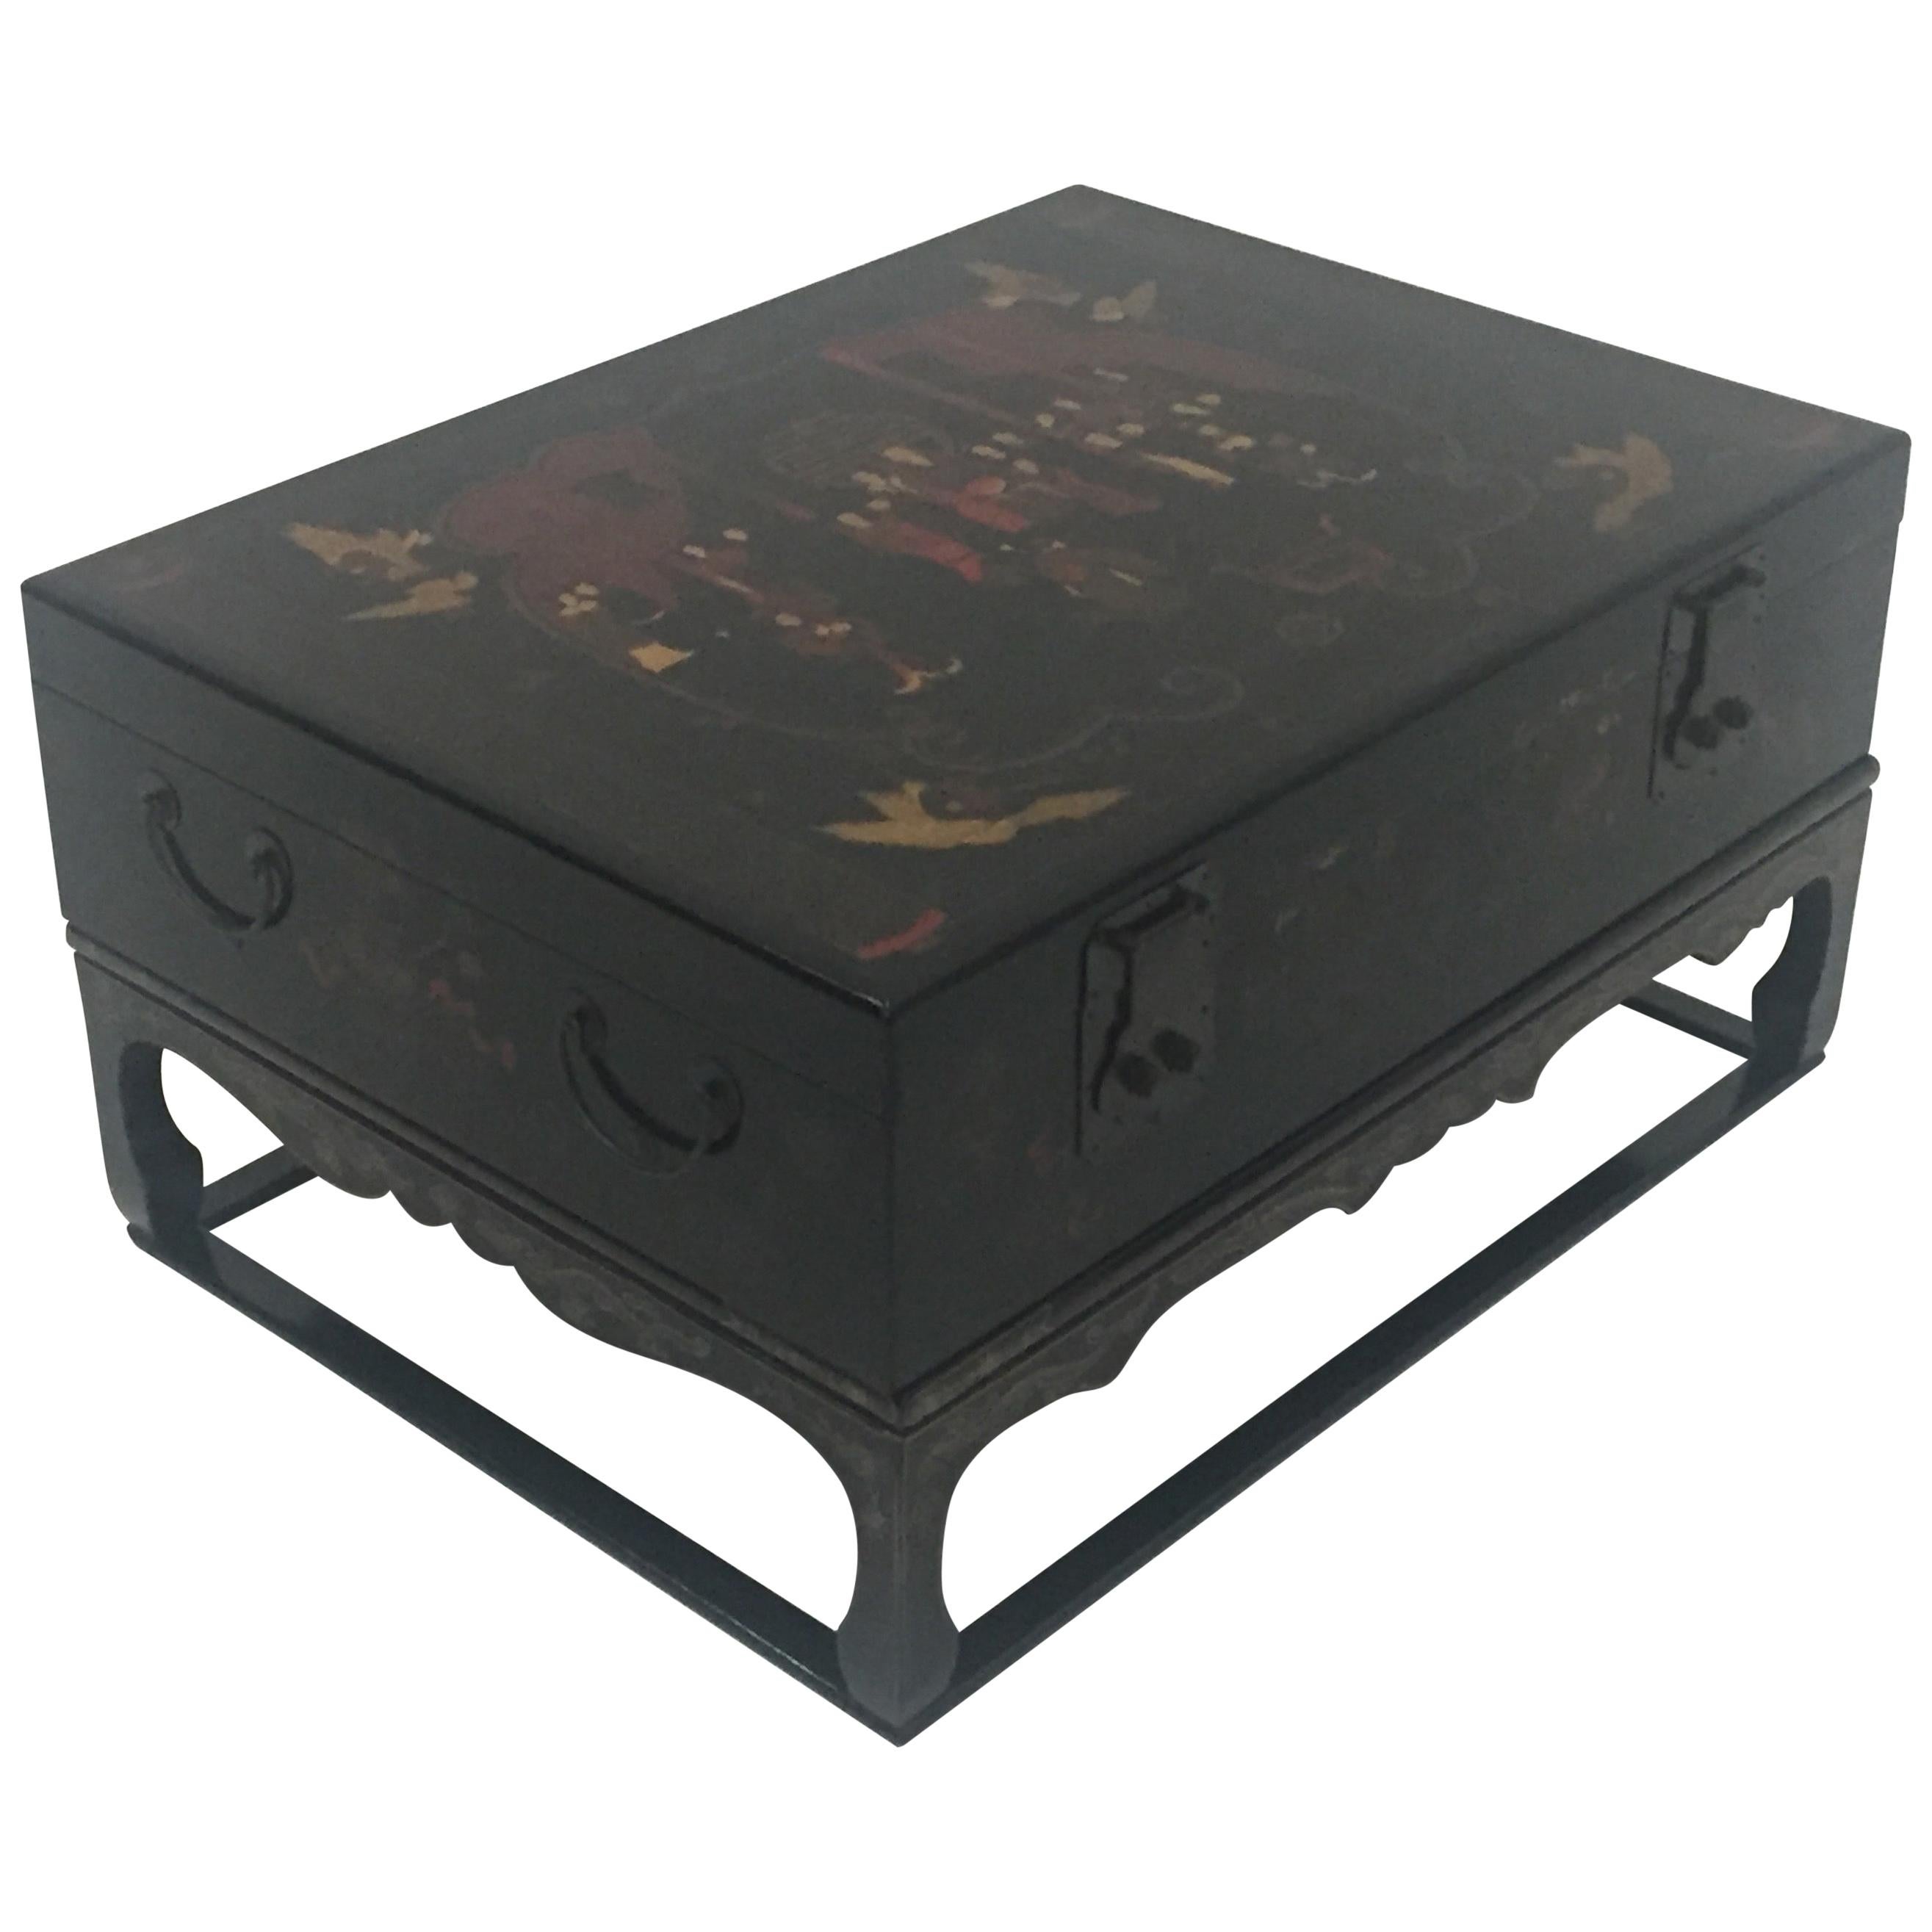 Stunning Asian Black Laquer Box on Custom Stand Coffee Table For Sale